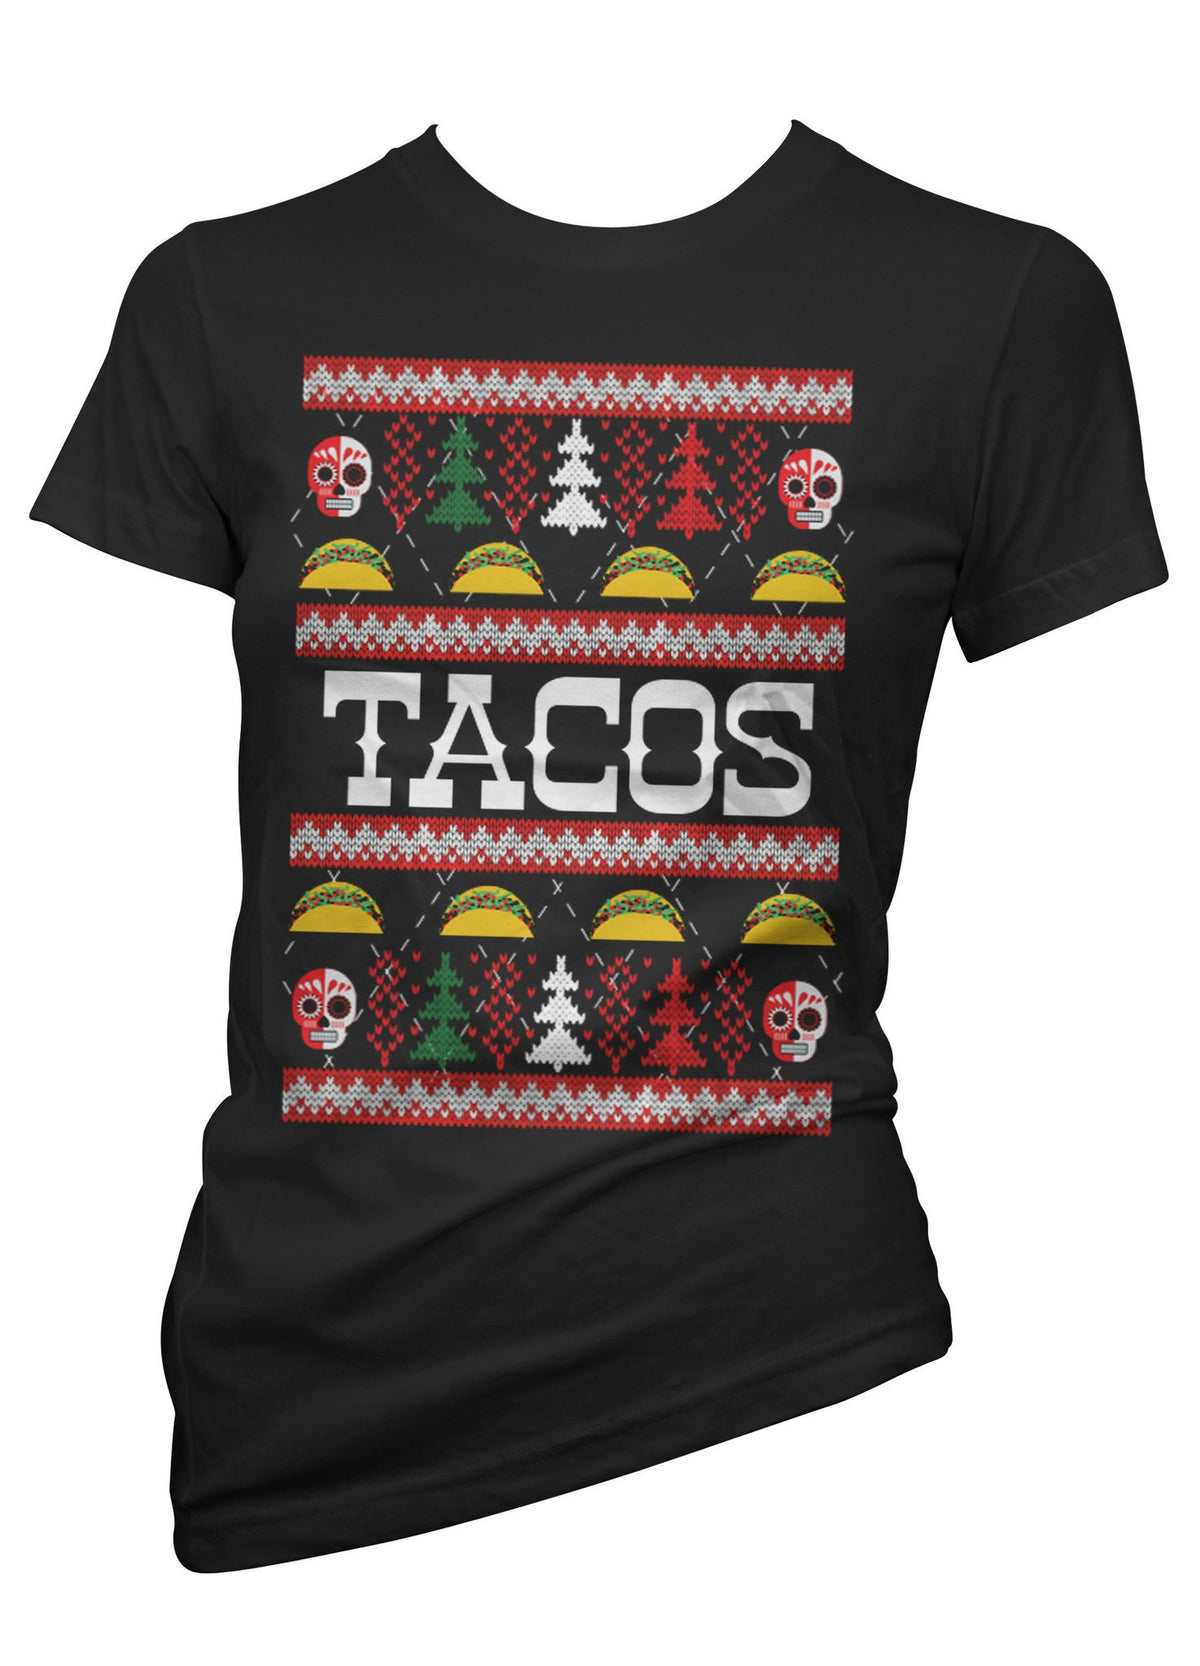 Women&#39;s &quot;Taco&quot; Ugly Christmas Sweater Tee by Cartel Ink (Black) - www.inkedshop.com